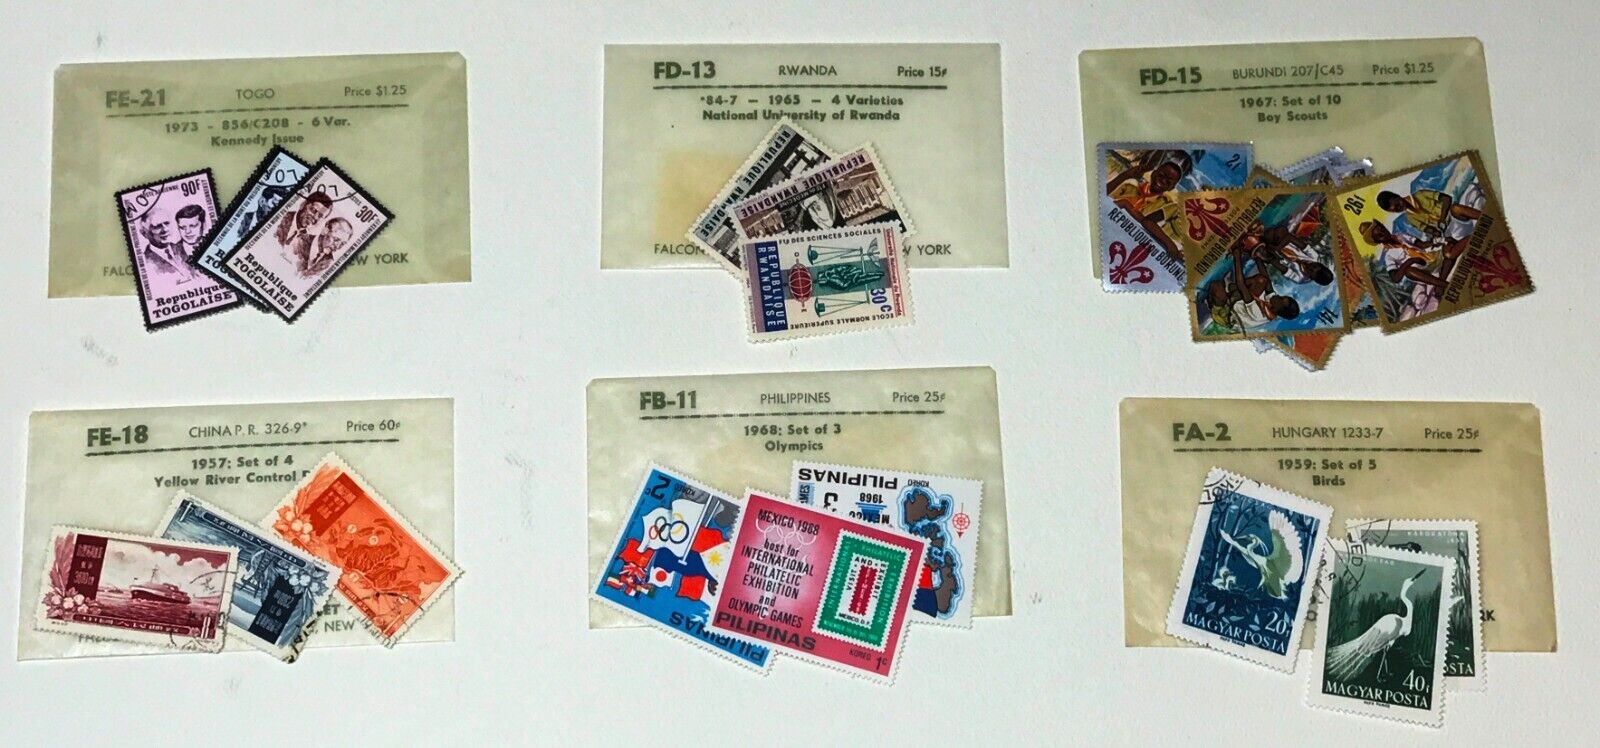 Vintage Foreign Stamp Lot    6 Packets    Multiple Stamps Each Packet   Lot E